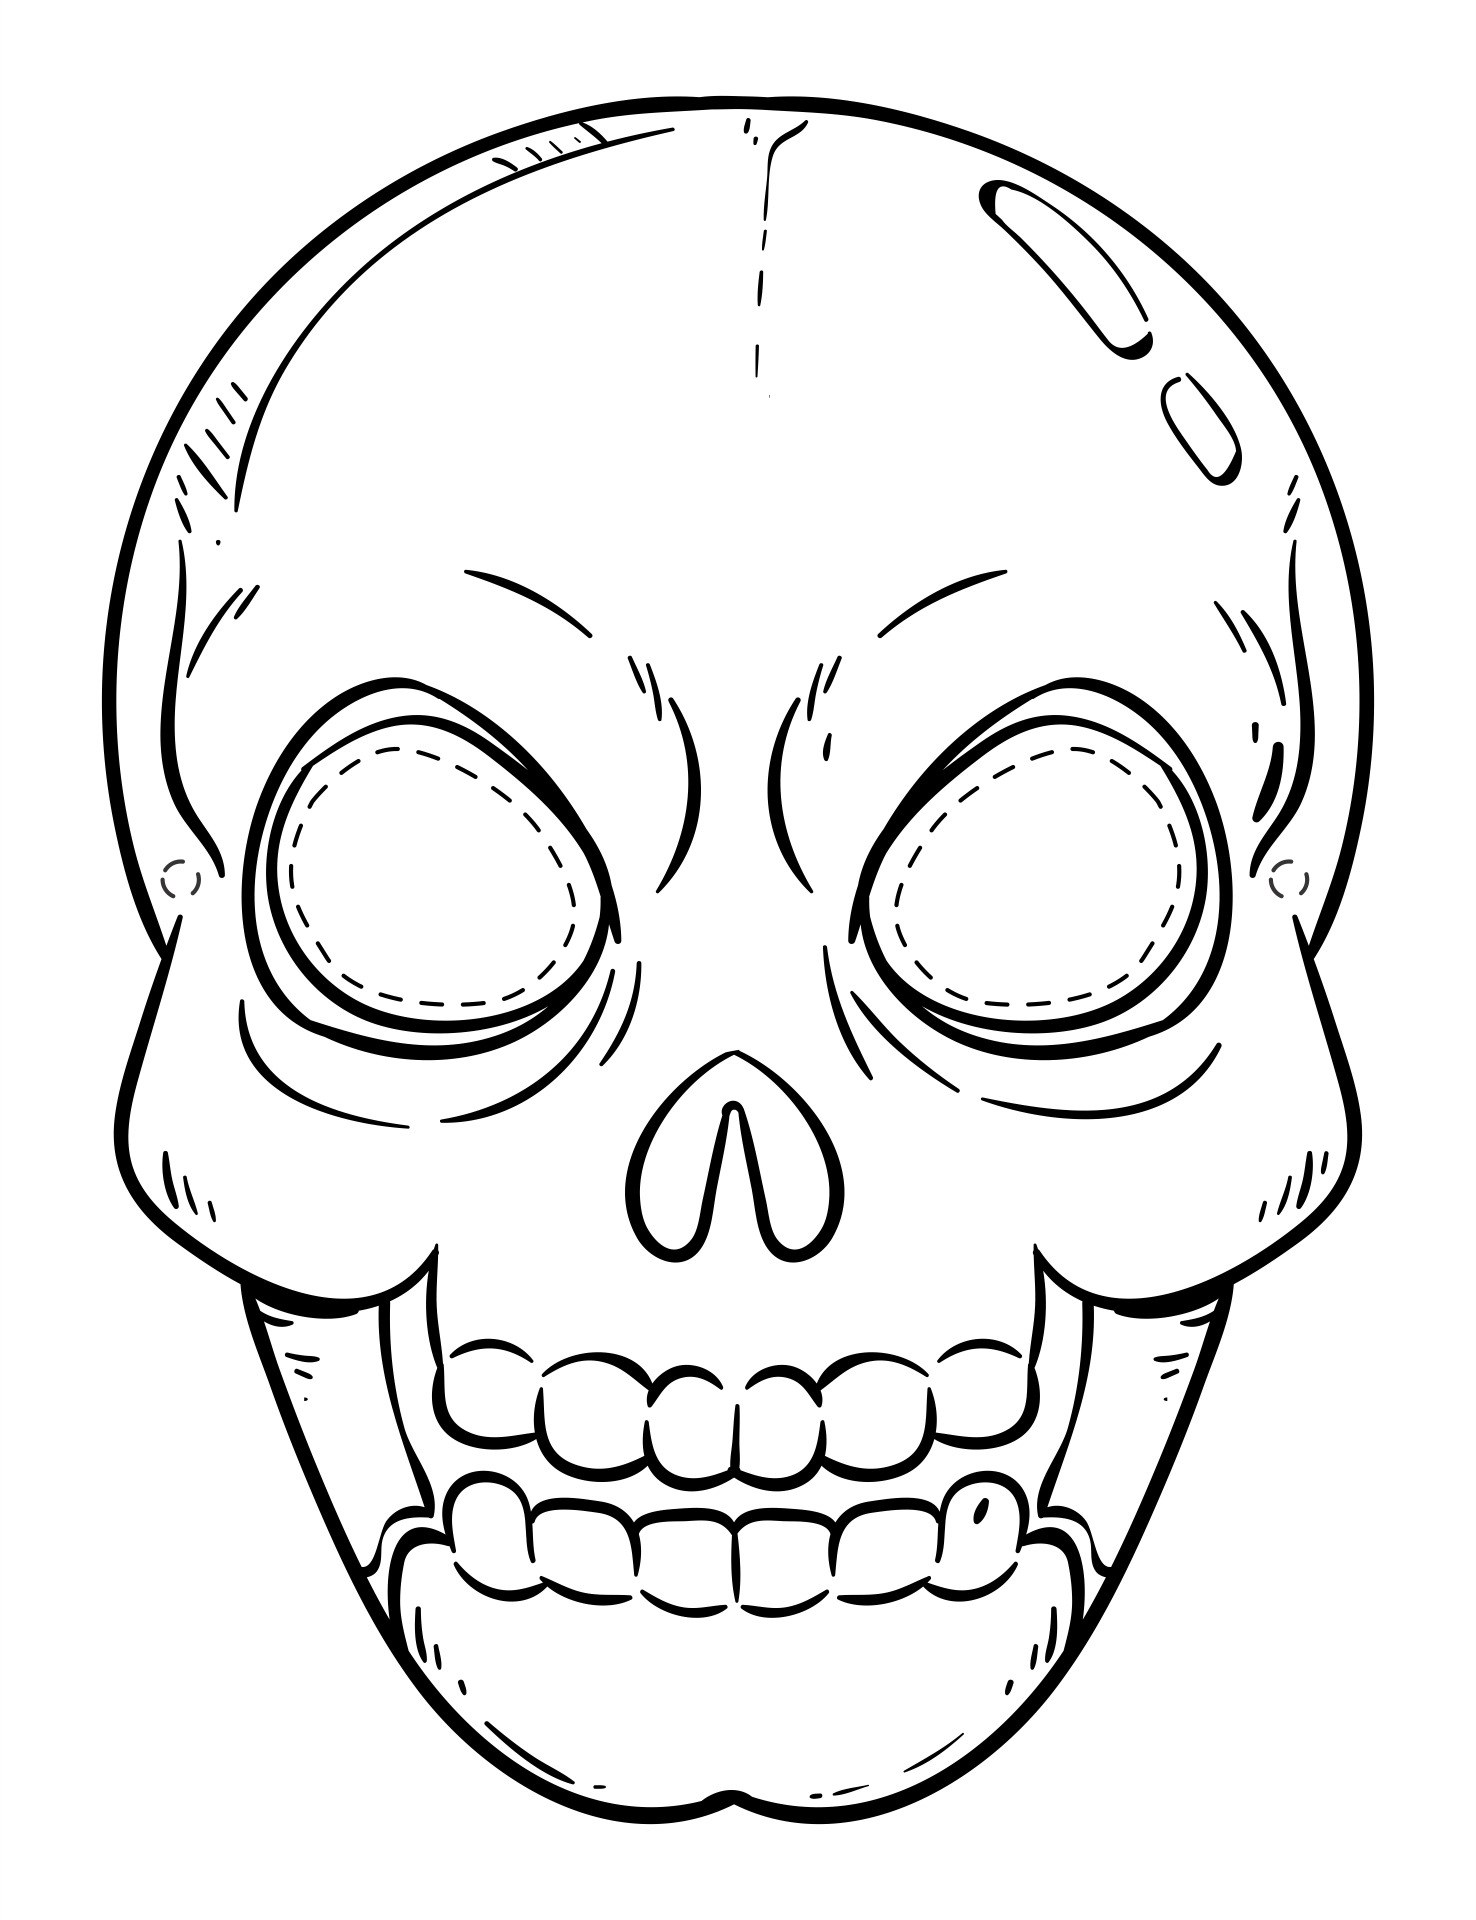 8-best-images-of-printable-halloween-masks-to-color-printable-halloween-mask-coloring-pages